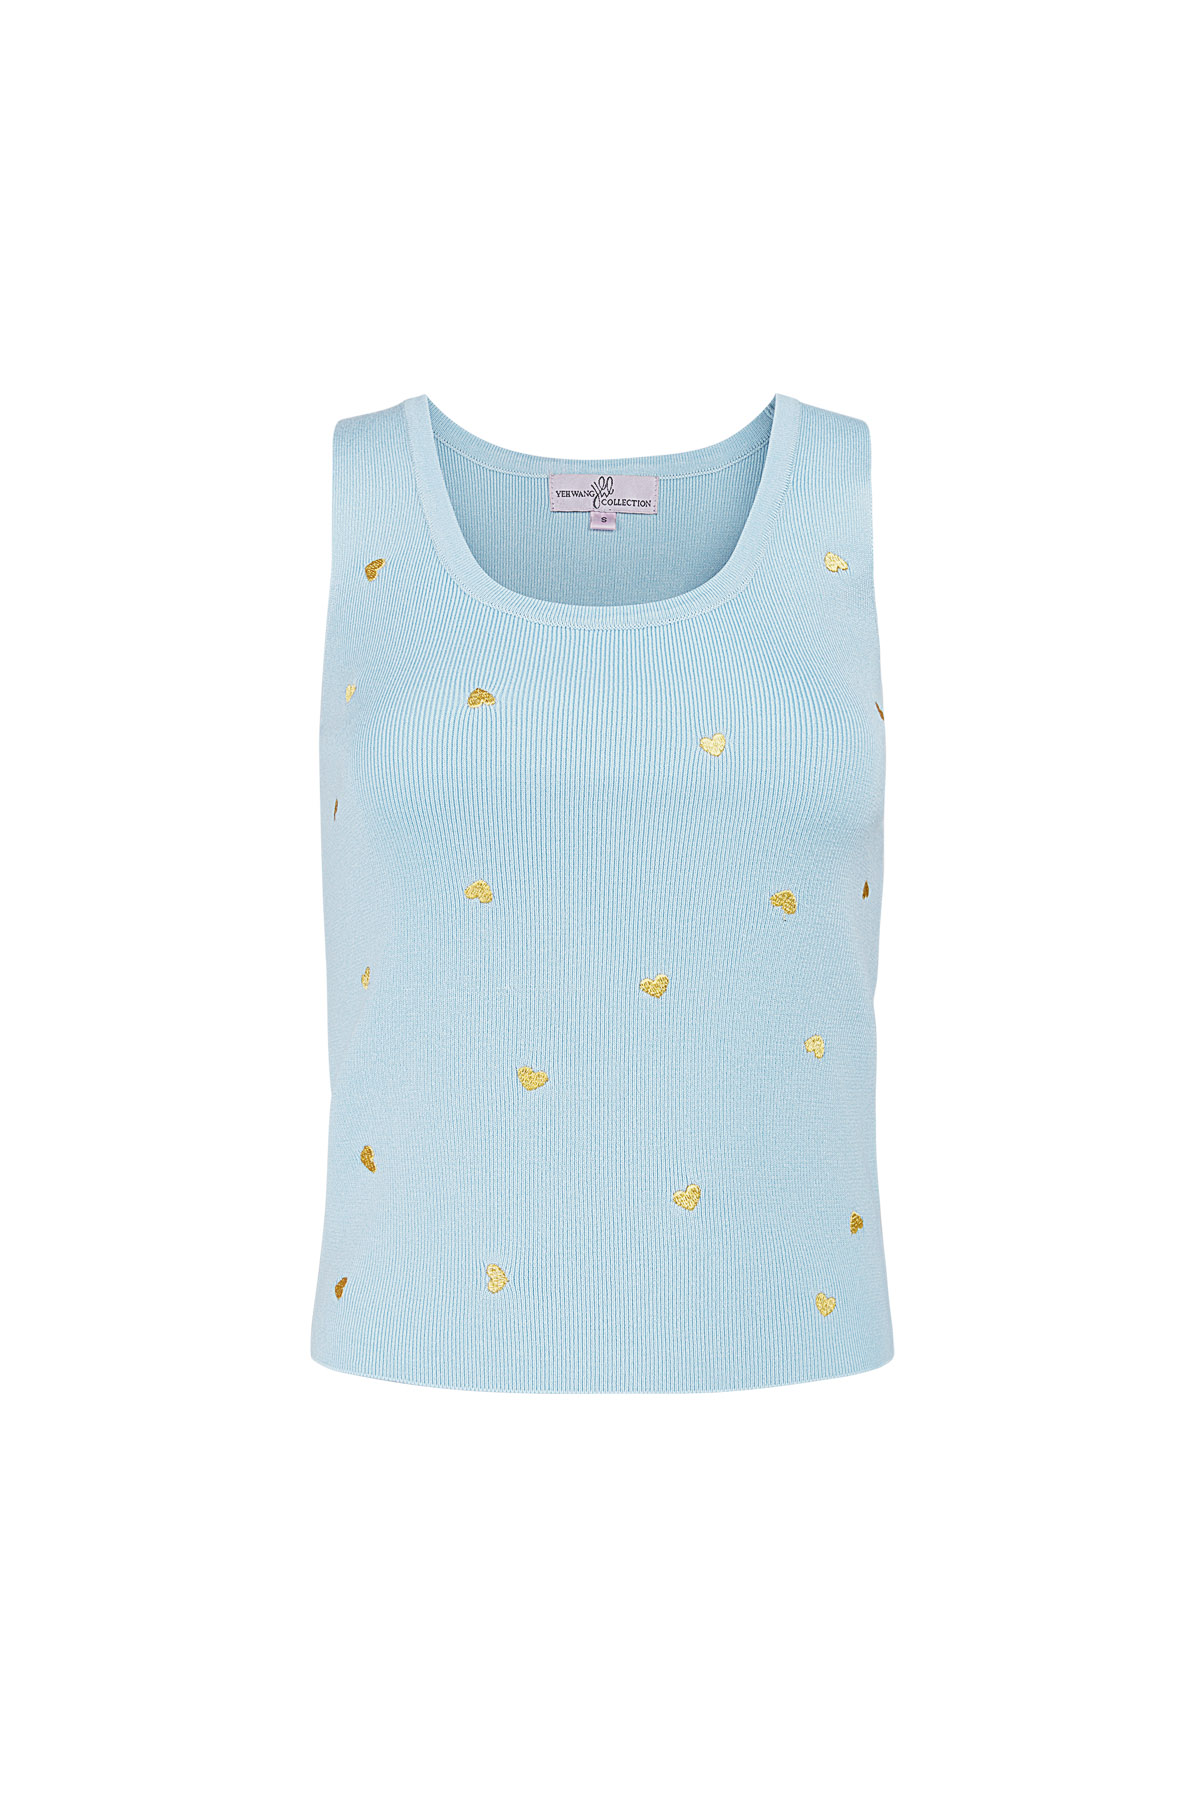 Sleeveless top with gold heart details small – blue h5 